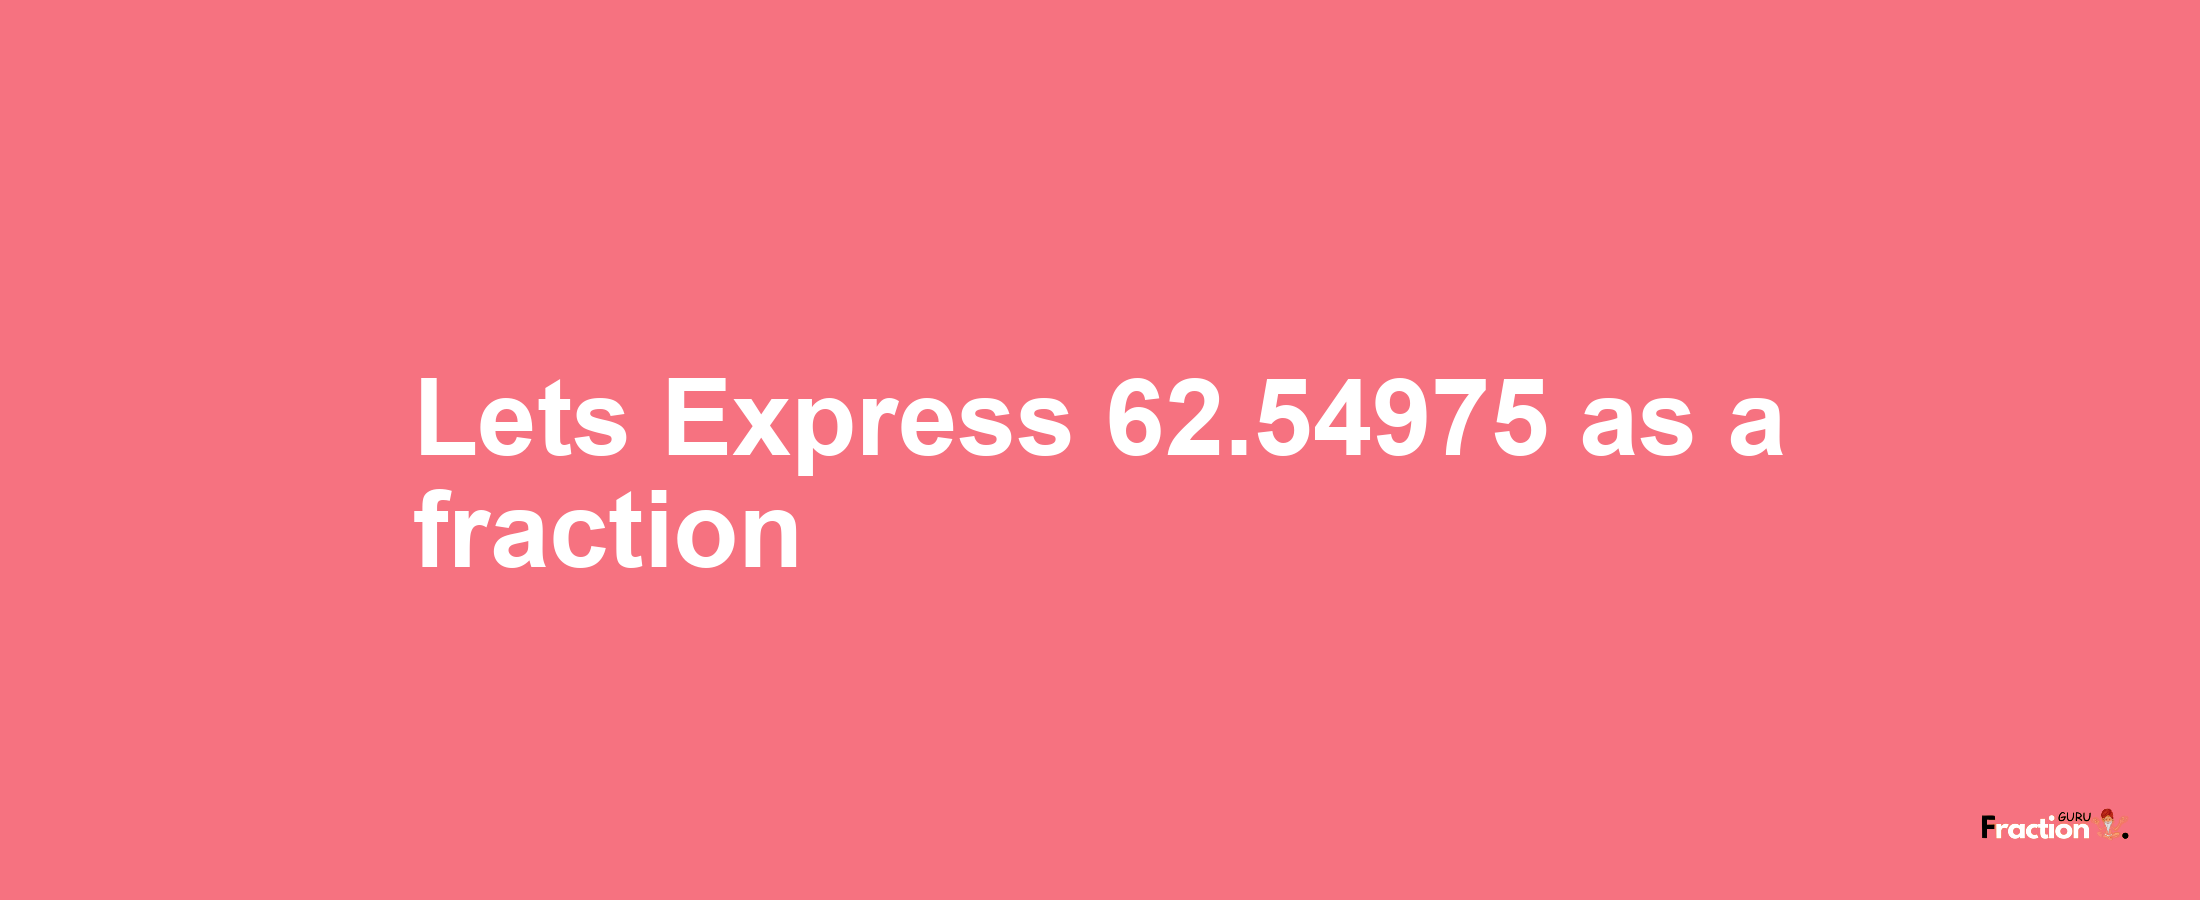 Lets Express 62.54975 as afraction